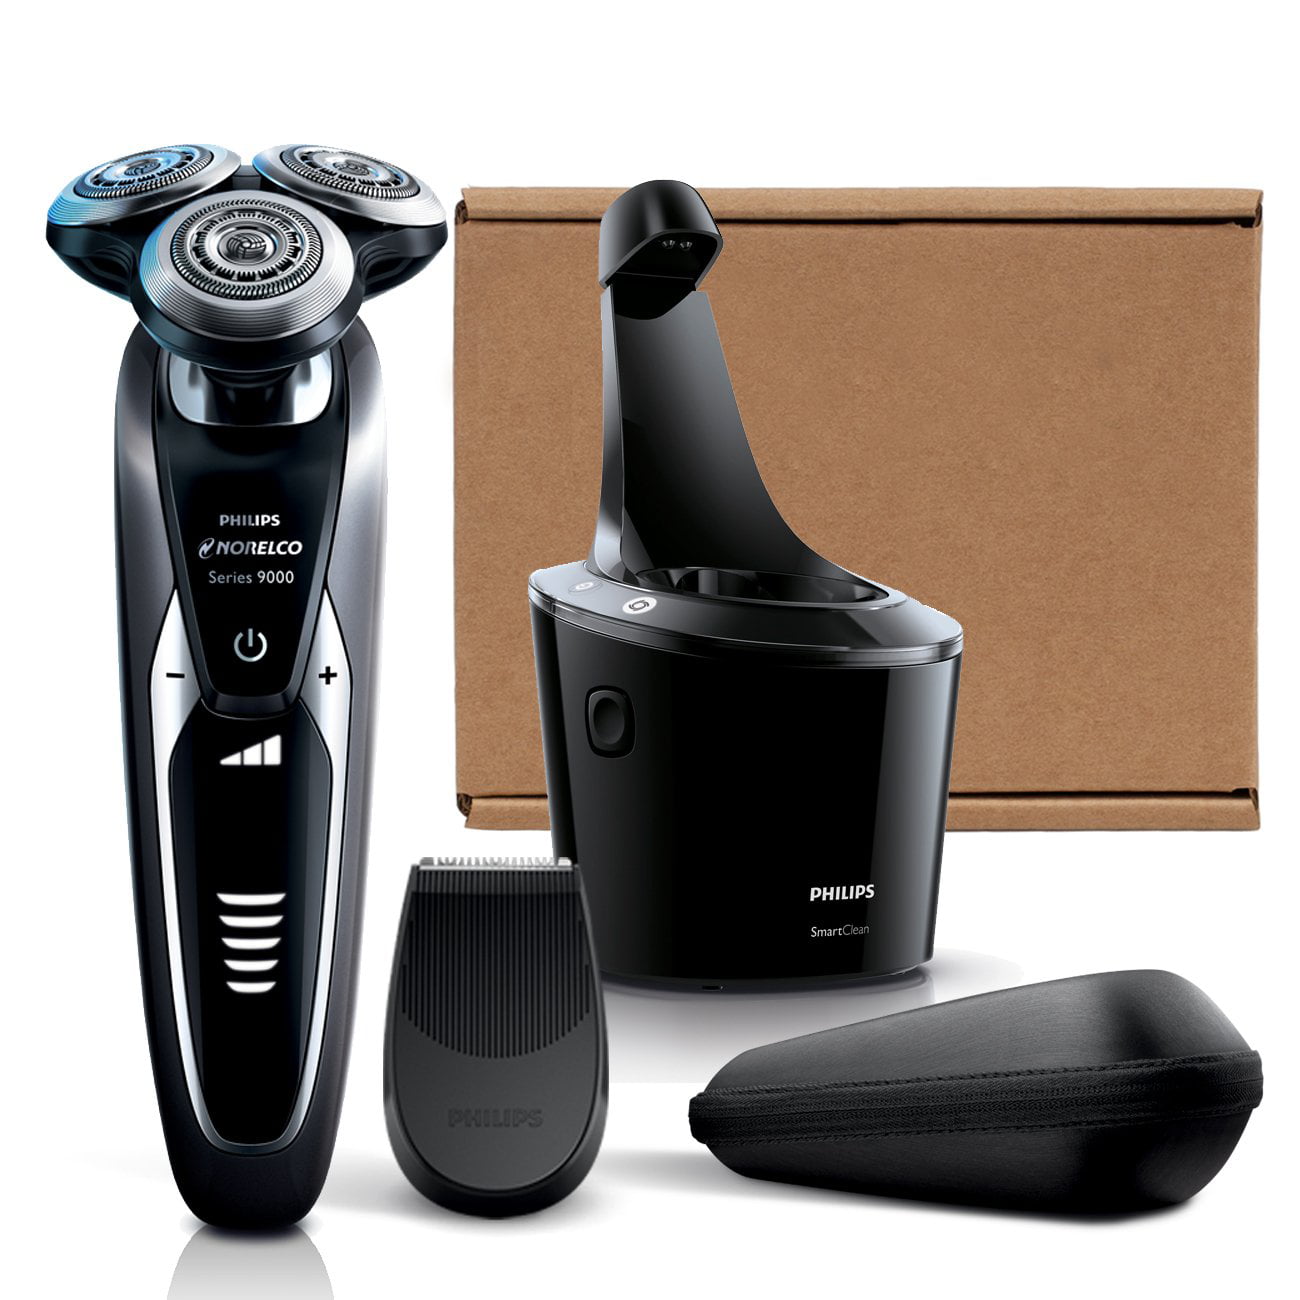 Philips Norelco s9311 Shaver 9300. Philips Norelco 9000. Philips Series 9000. Philips Norelco Shaver 3800. Электробритва philips series 9000